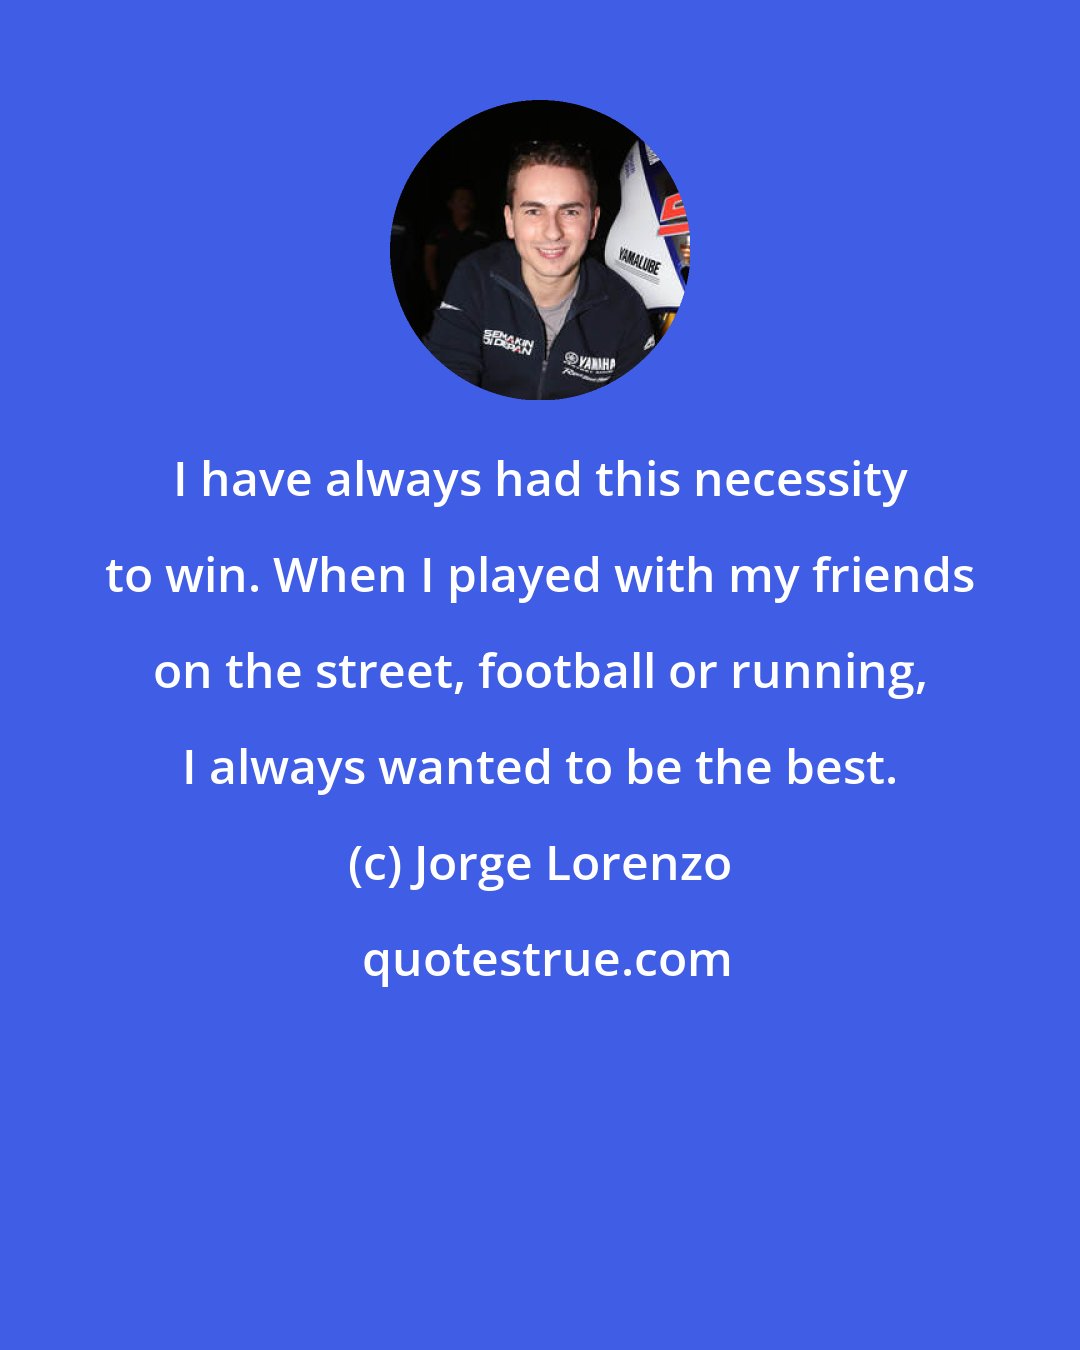 Jorge Lorenzo: I have always had this necessity to win. When I played with my friends on the street, football or running, I always wanted to be the best.